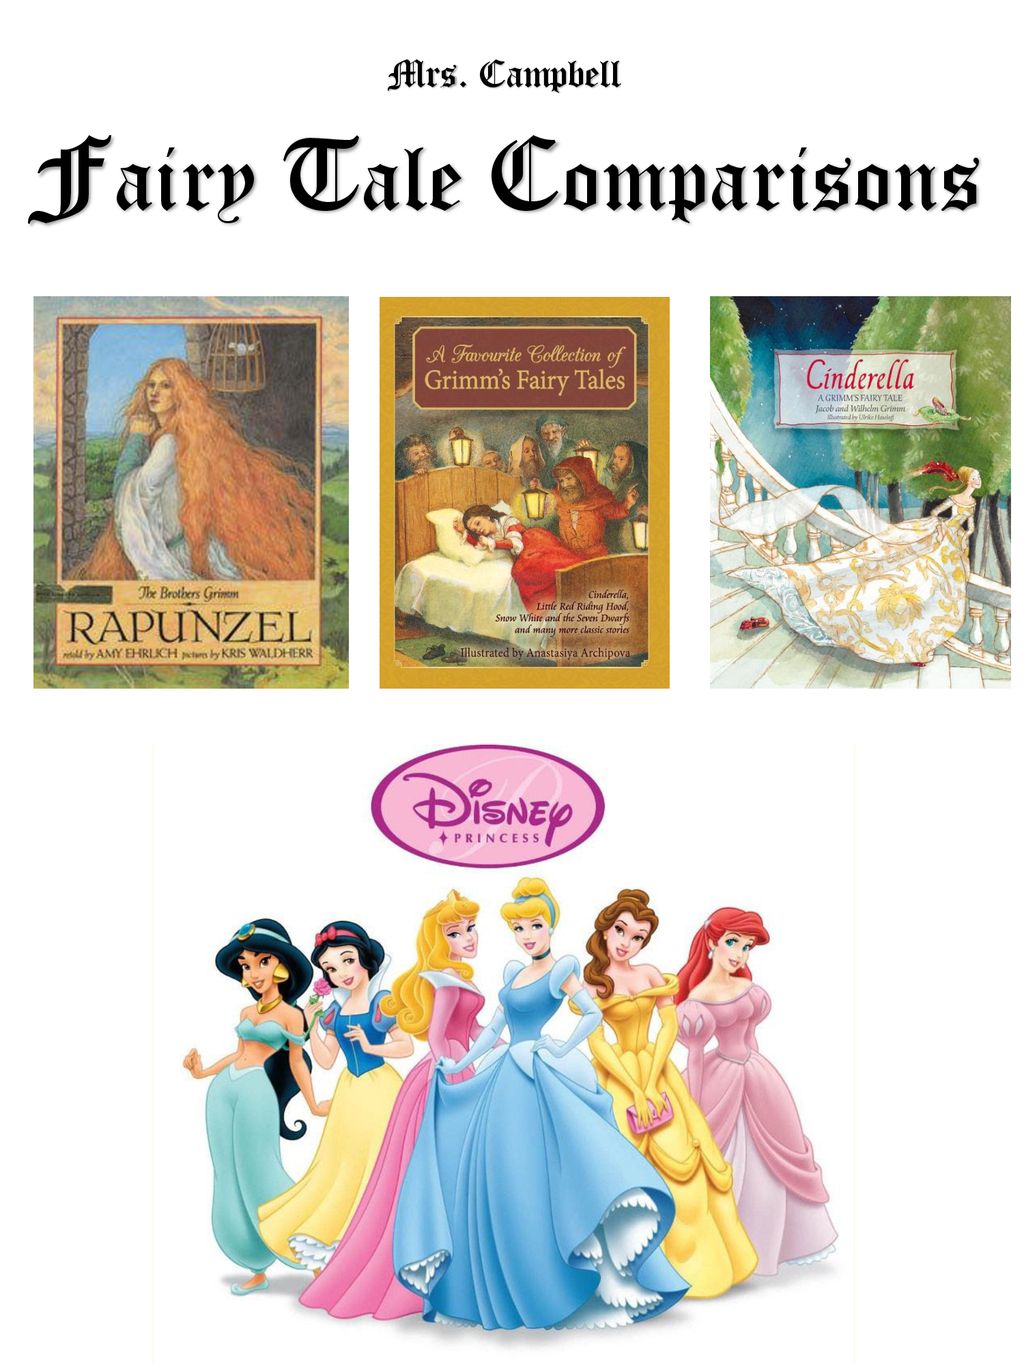 From Snow White to Cinderella, the story of fairytales on film, Fairytales